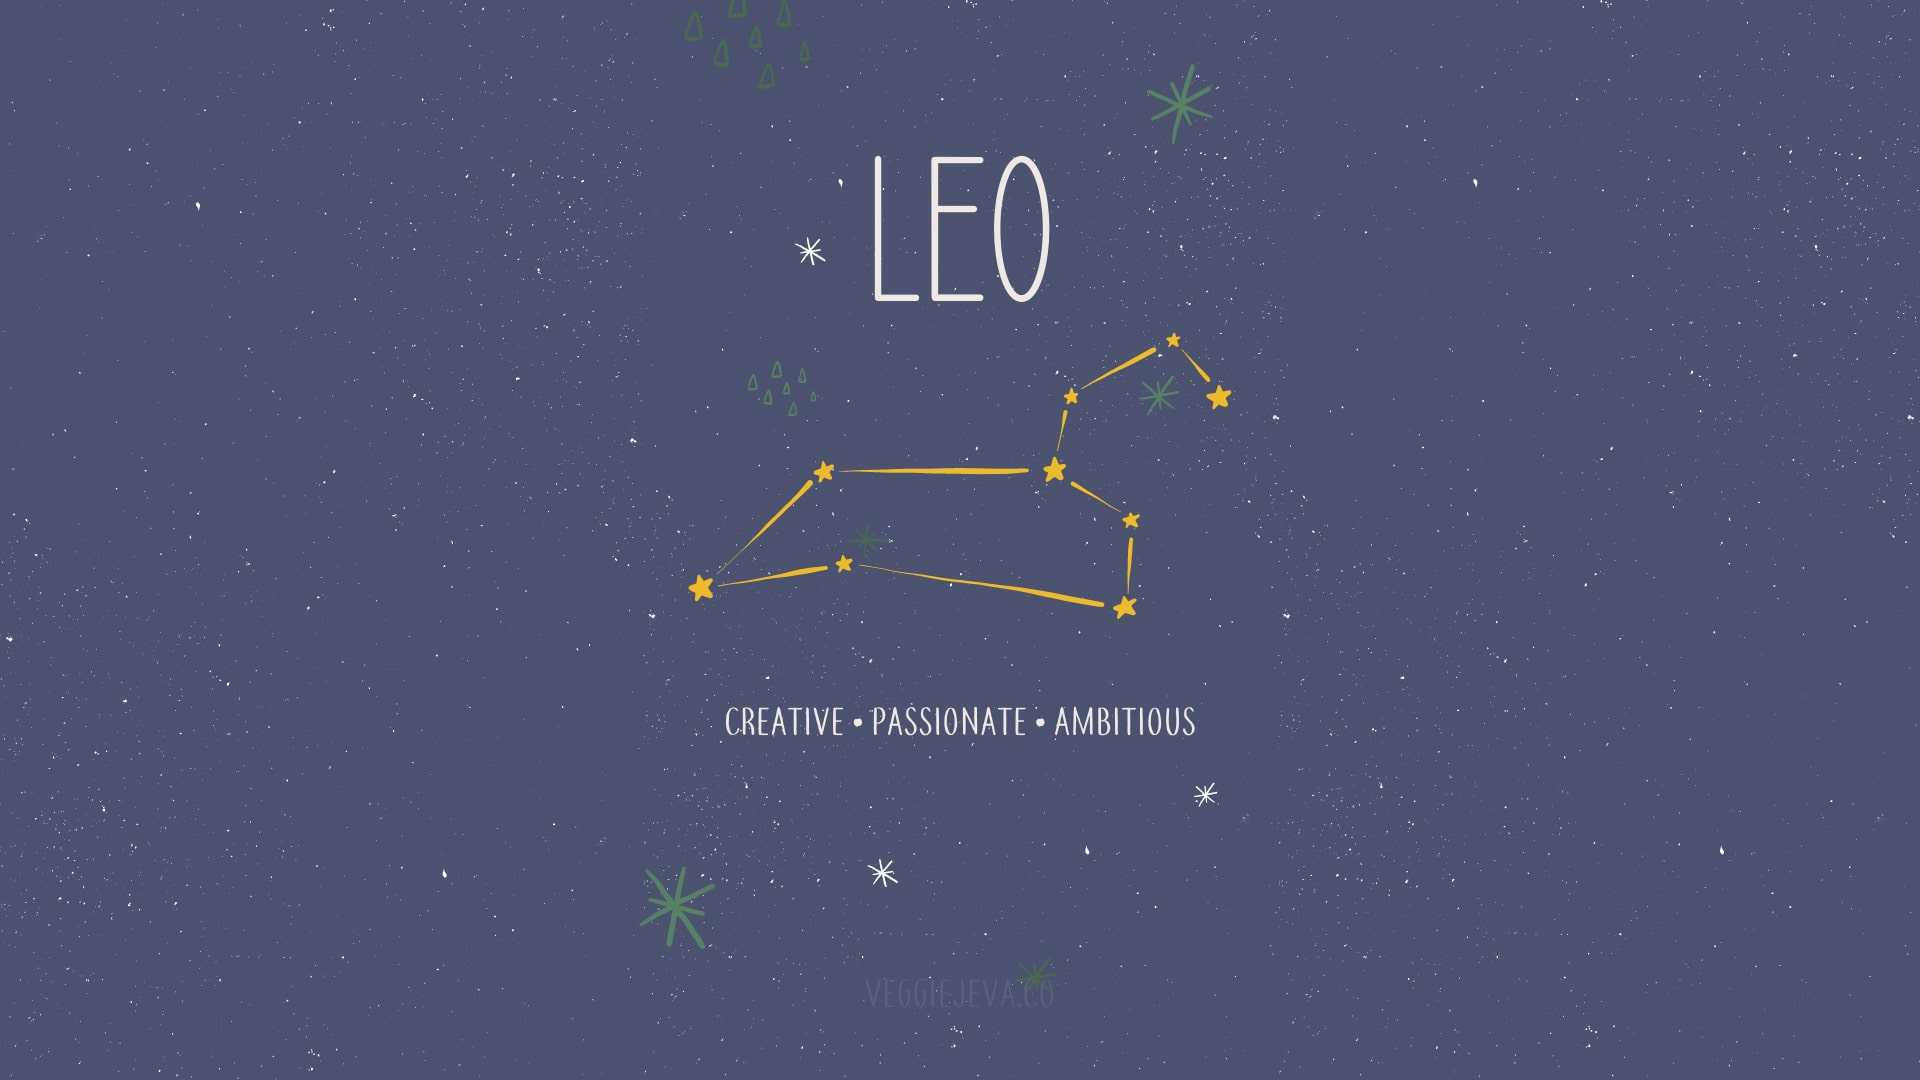 Leo Constellation And Qualities Background